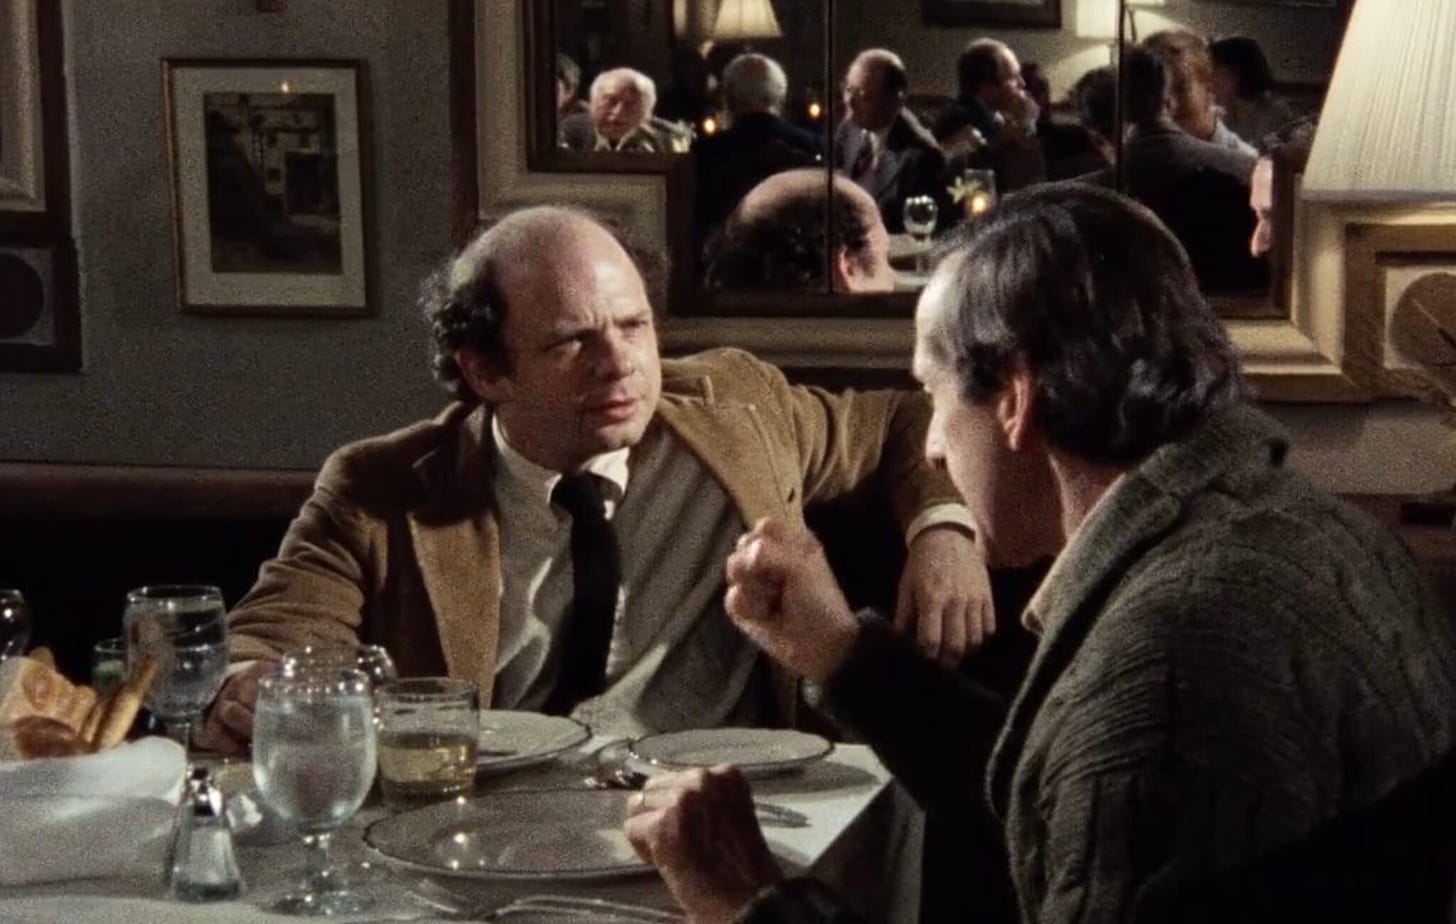 Screencap from My Dinner With Andre. Wallace Shawn listens, his arm resting on the back of the chair. Andre is telling a story. No food on their plates.